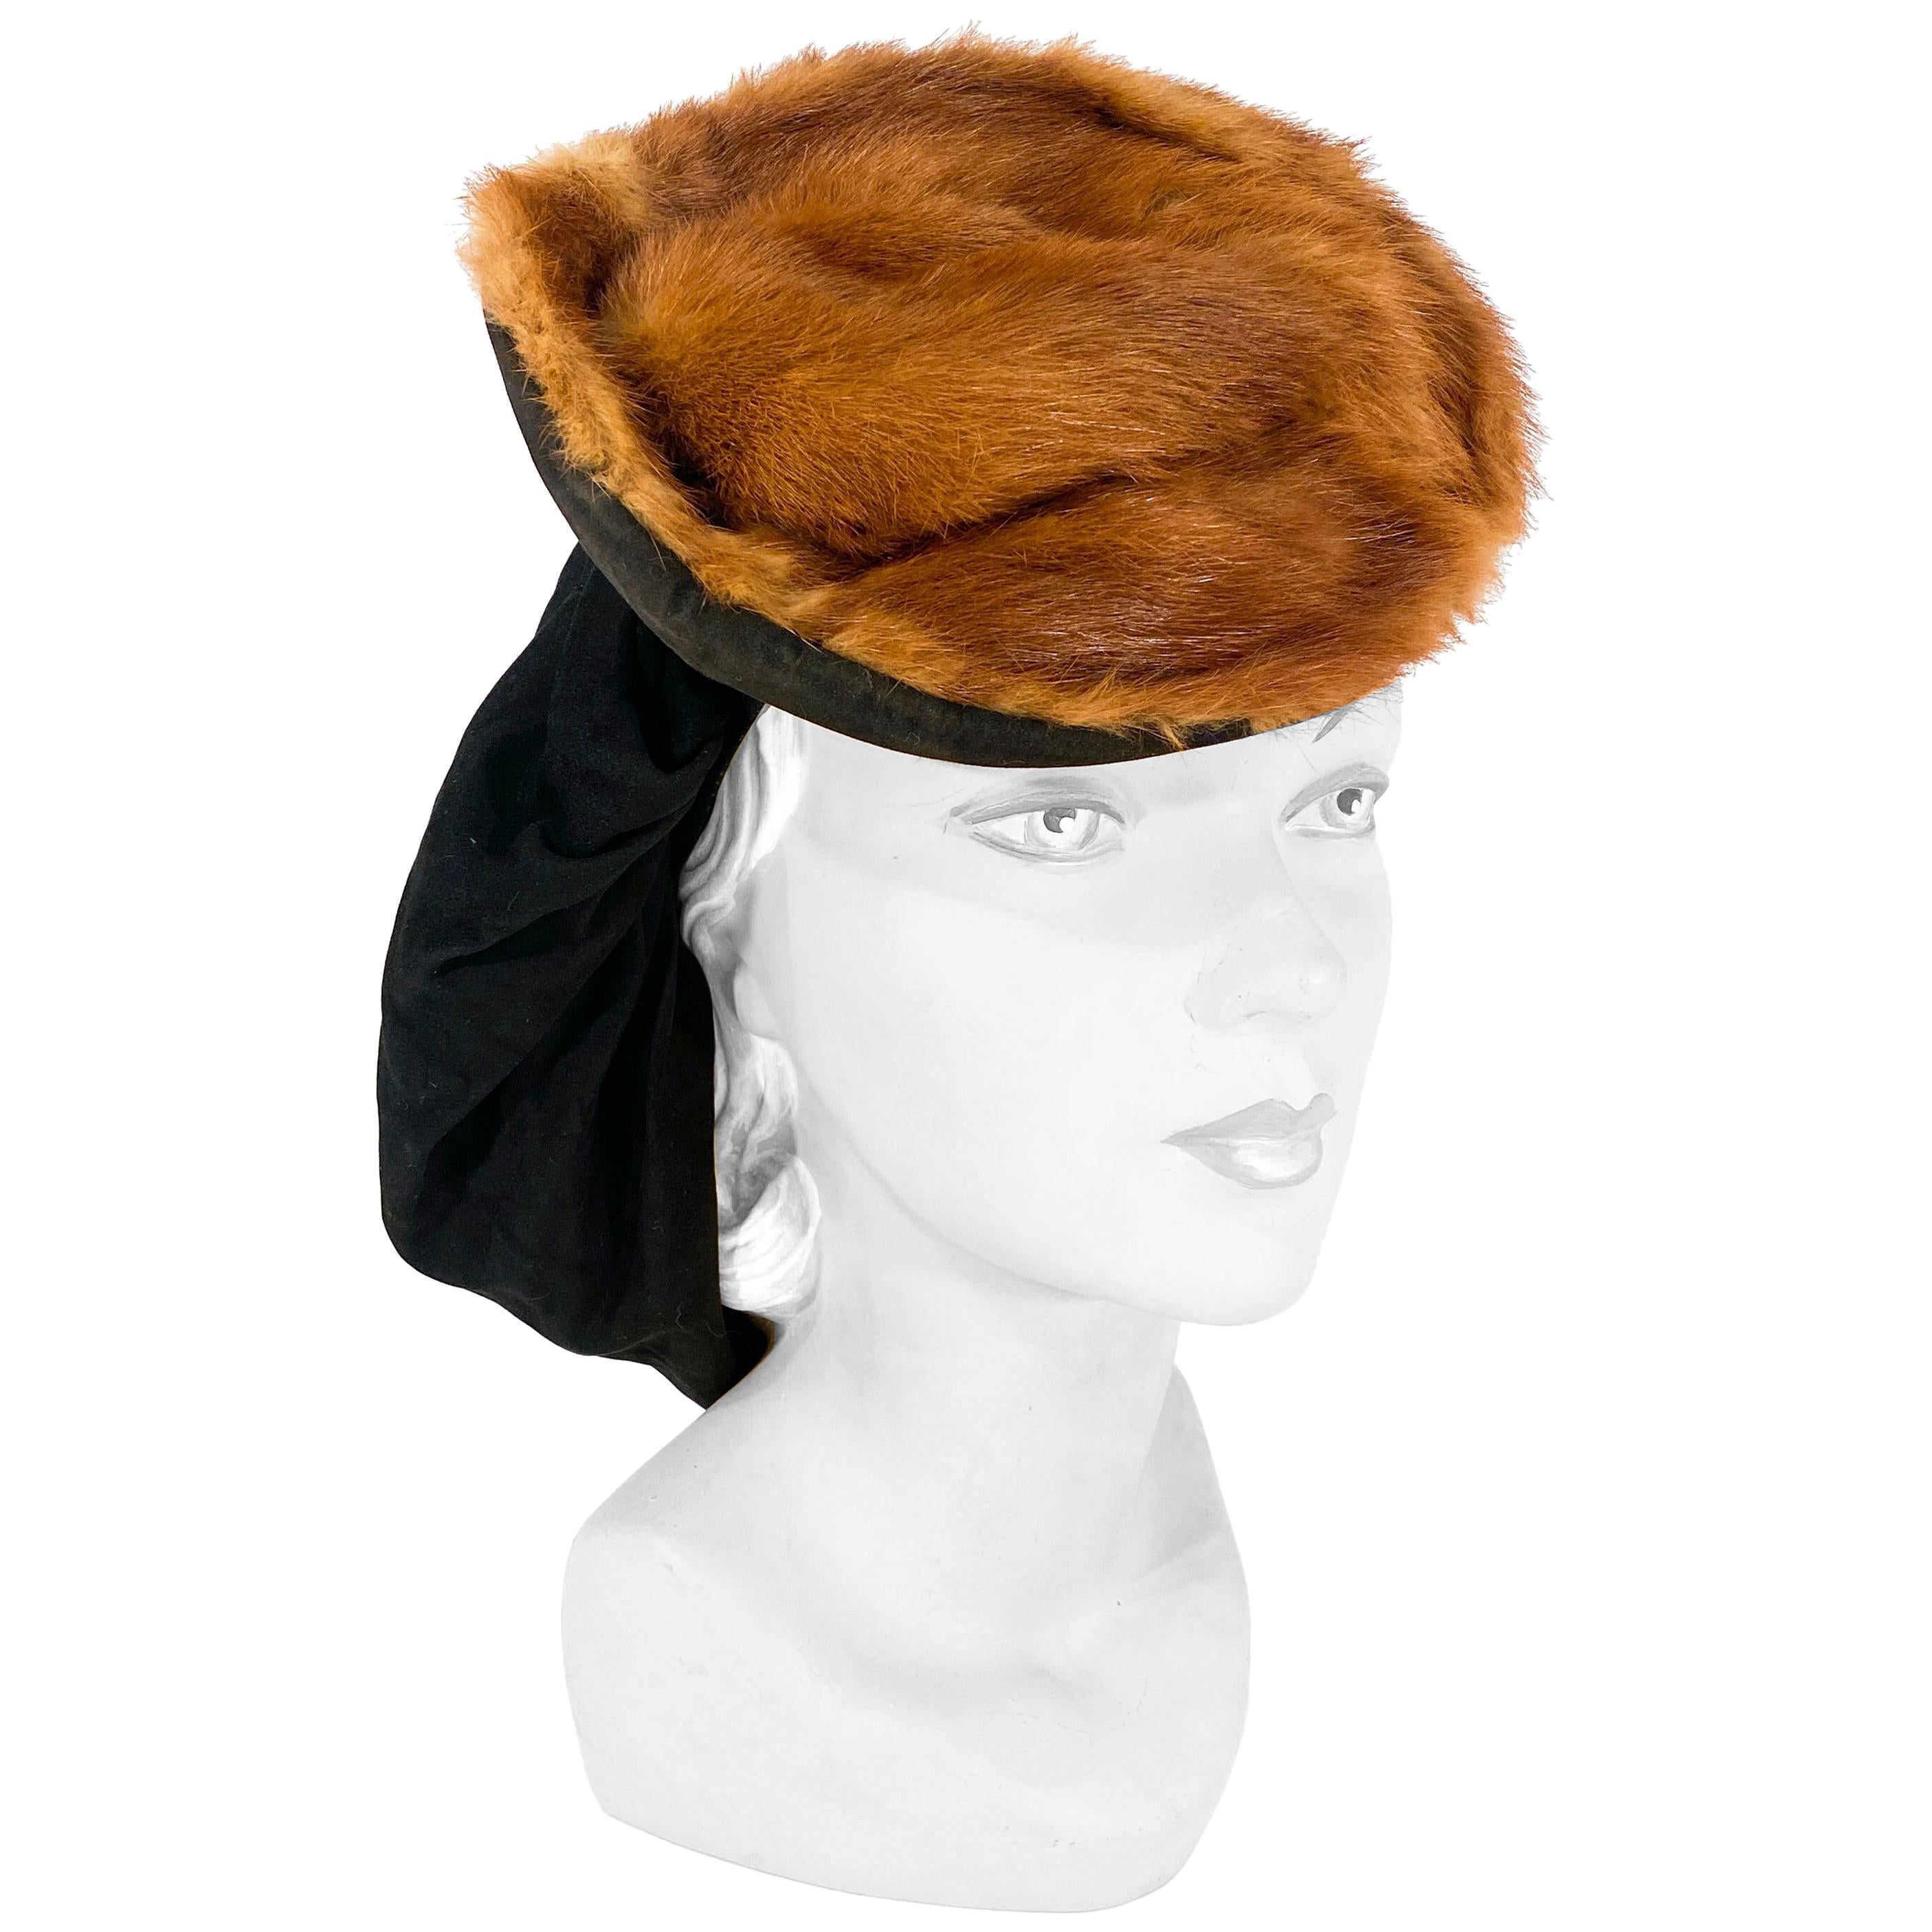 1940s Nutria Fur and Suede Leather Snood Hat